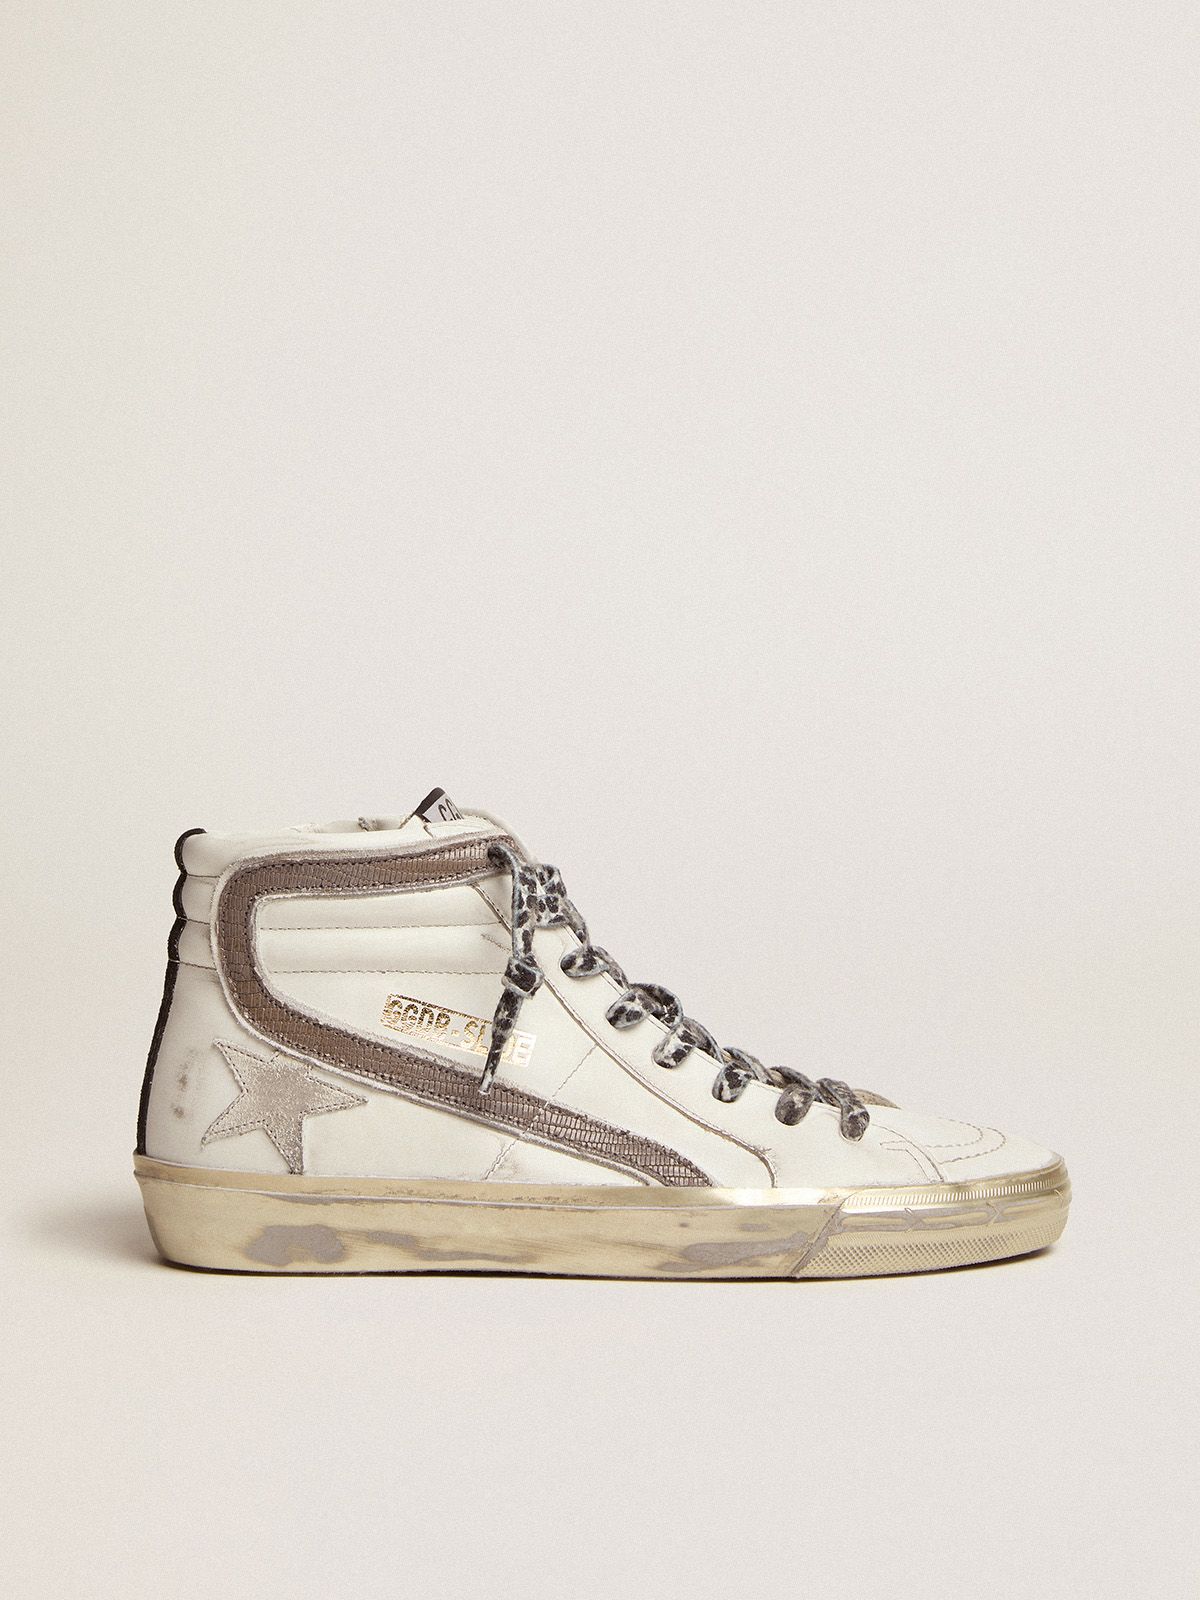 golden goose with white star sneakers leather and suede dove-gray lizard-print flash Slide